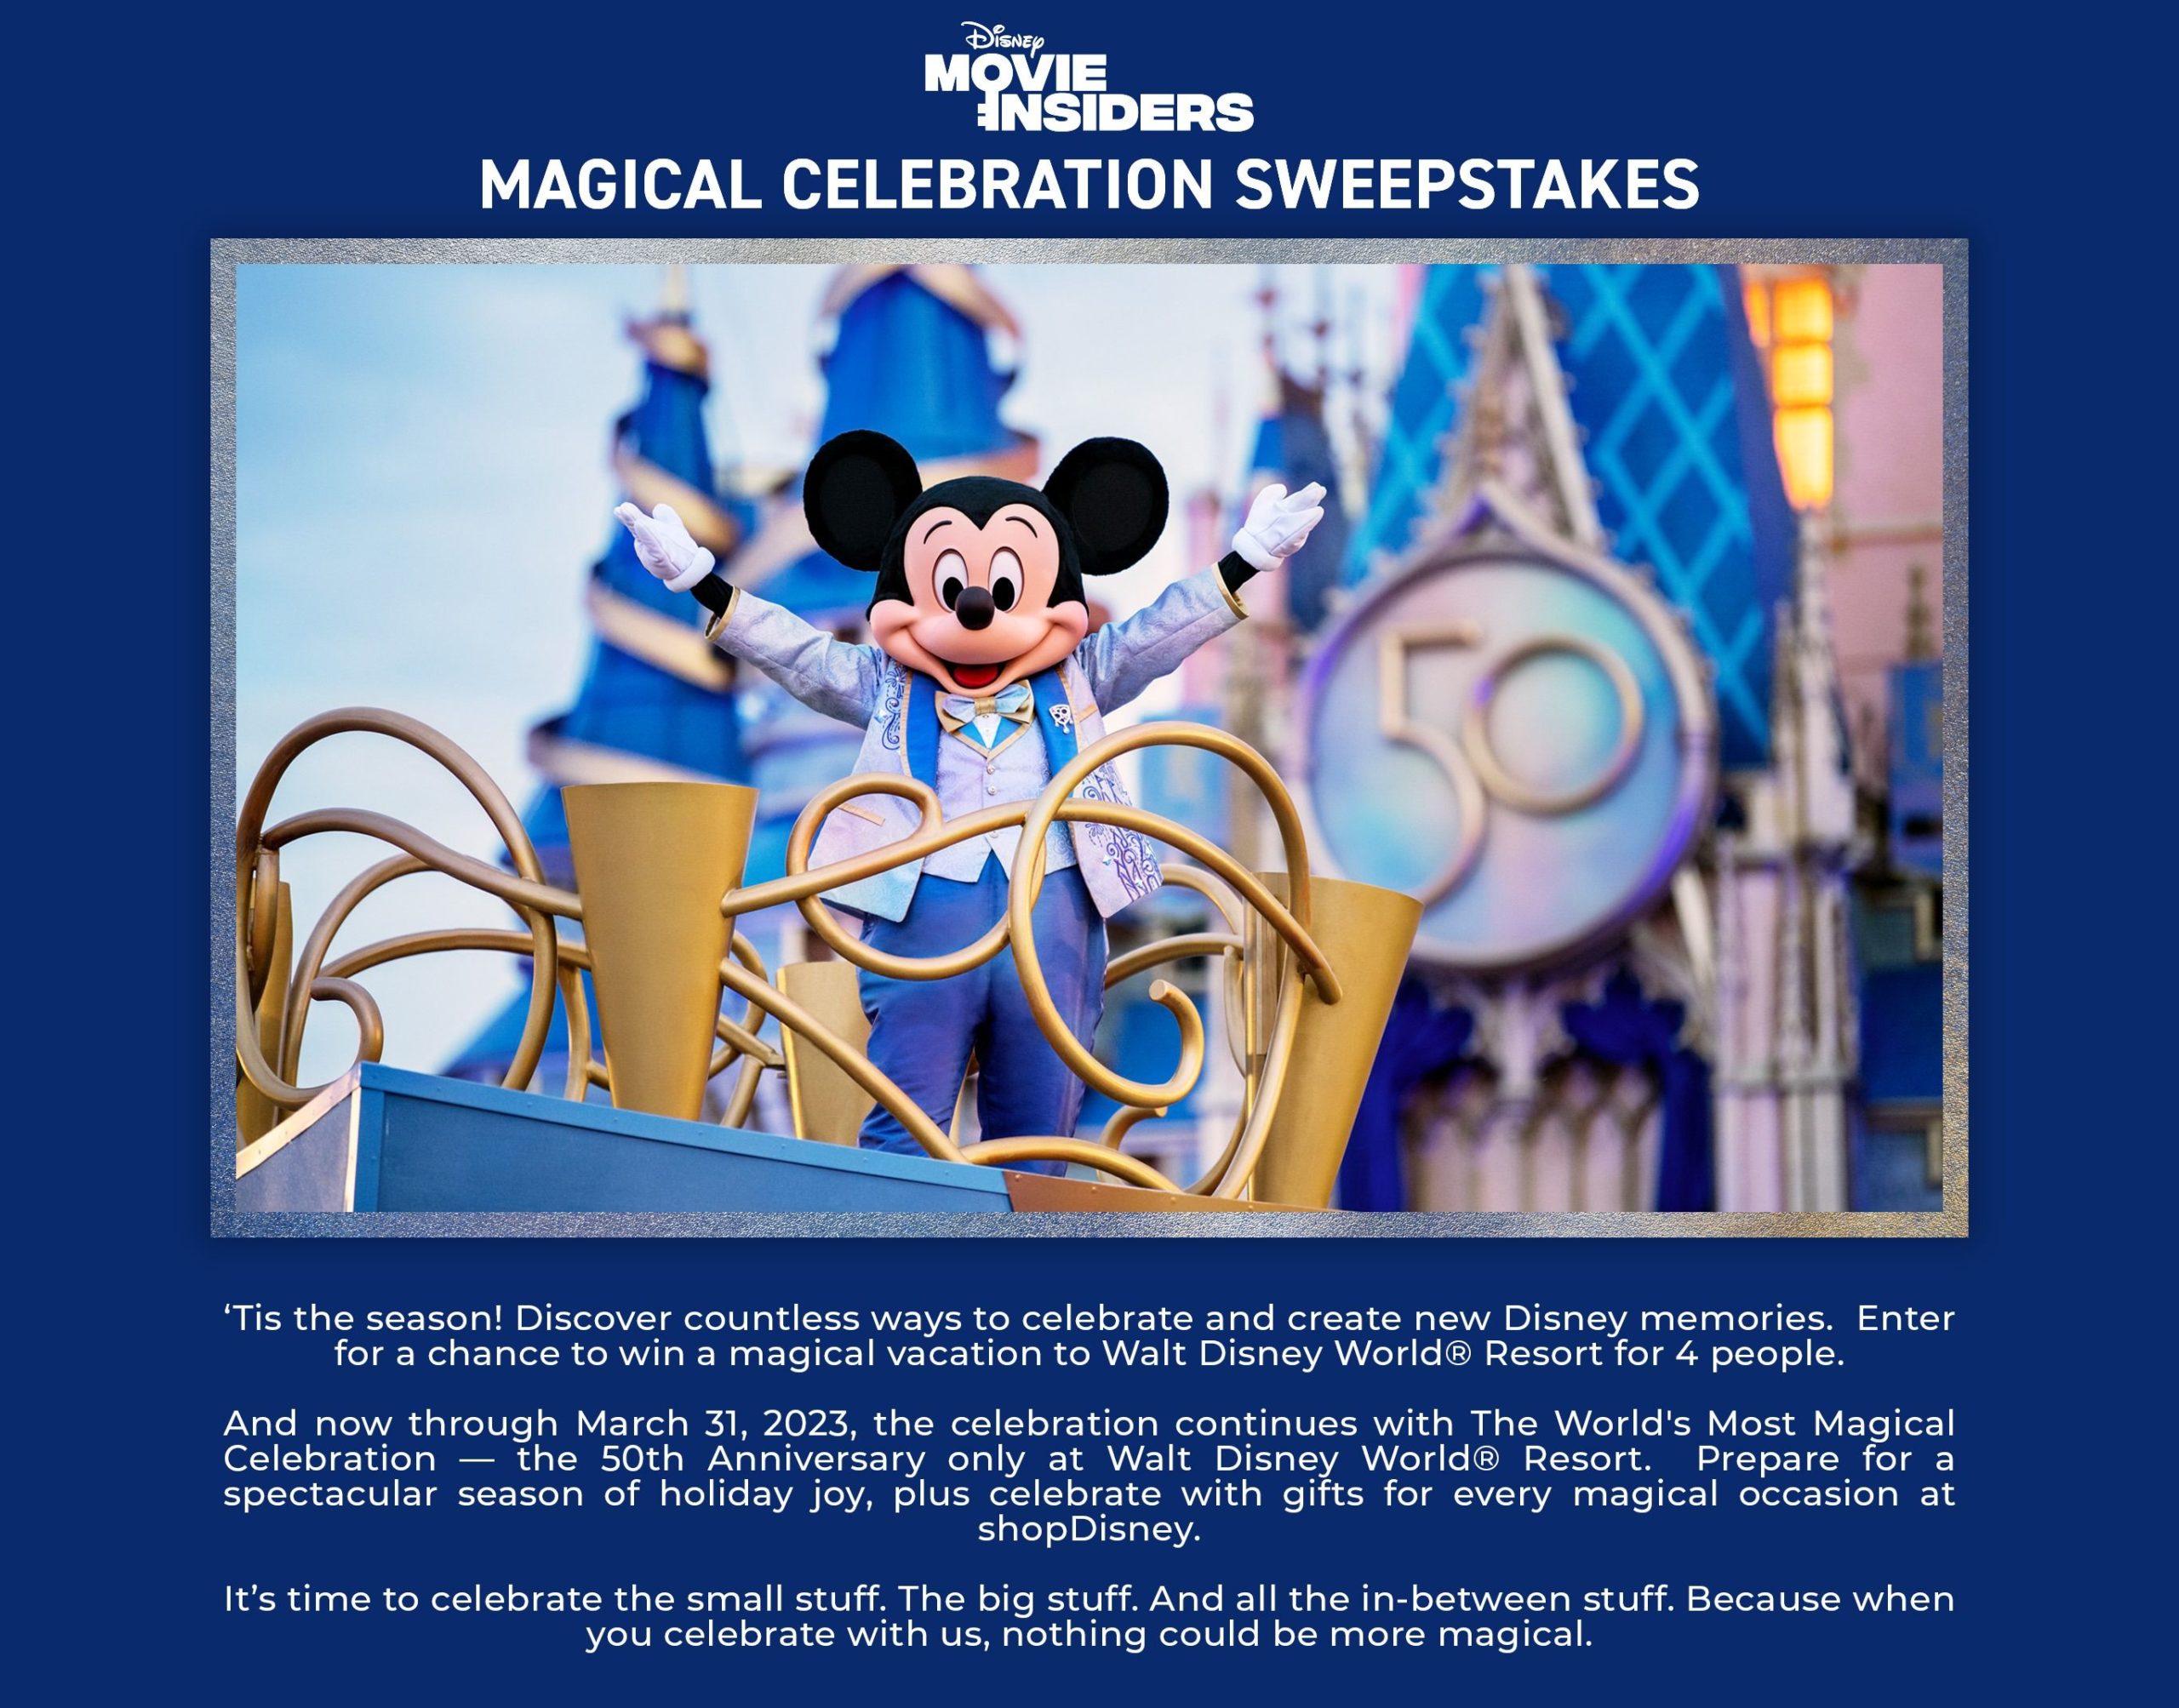 Magical Celebration Sweepstakes